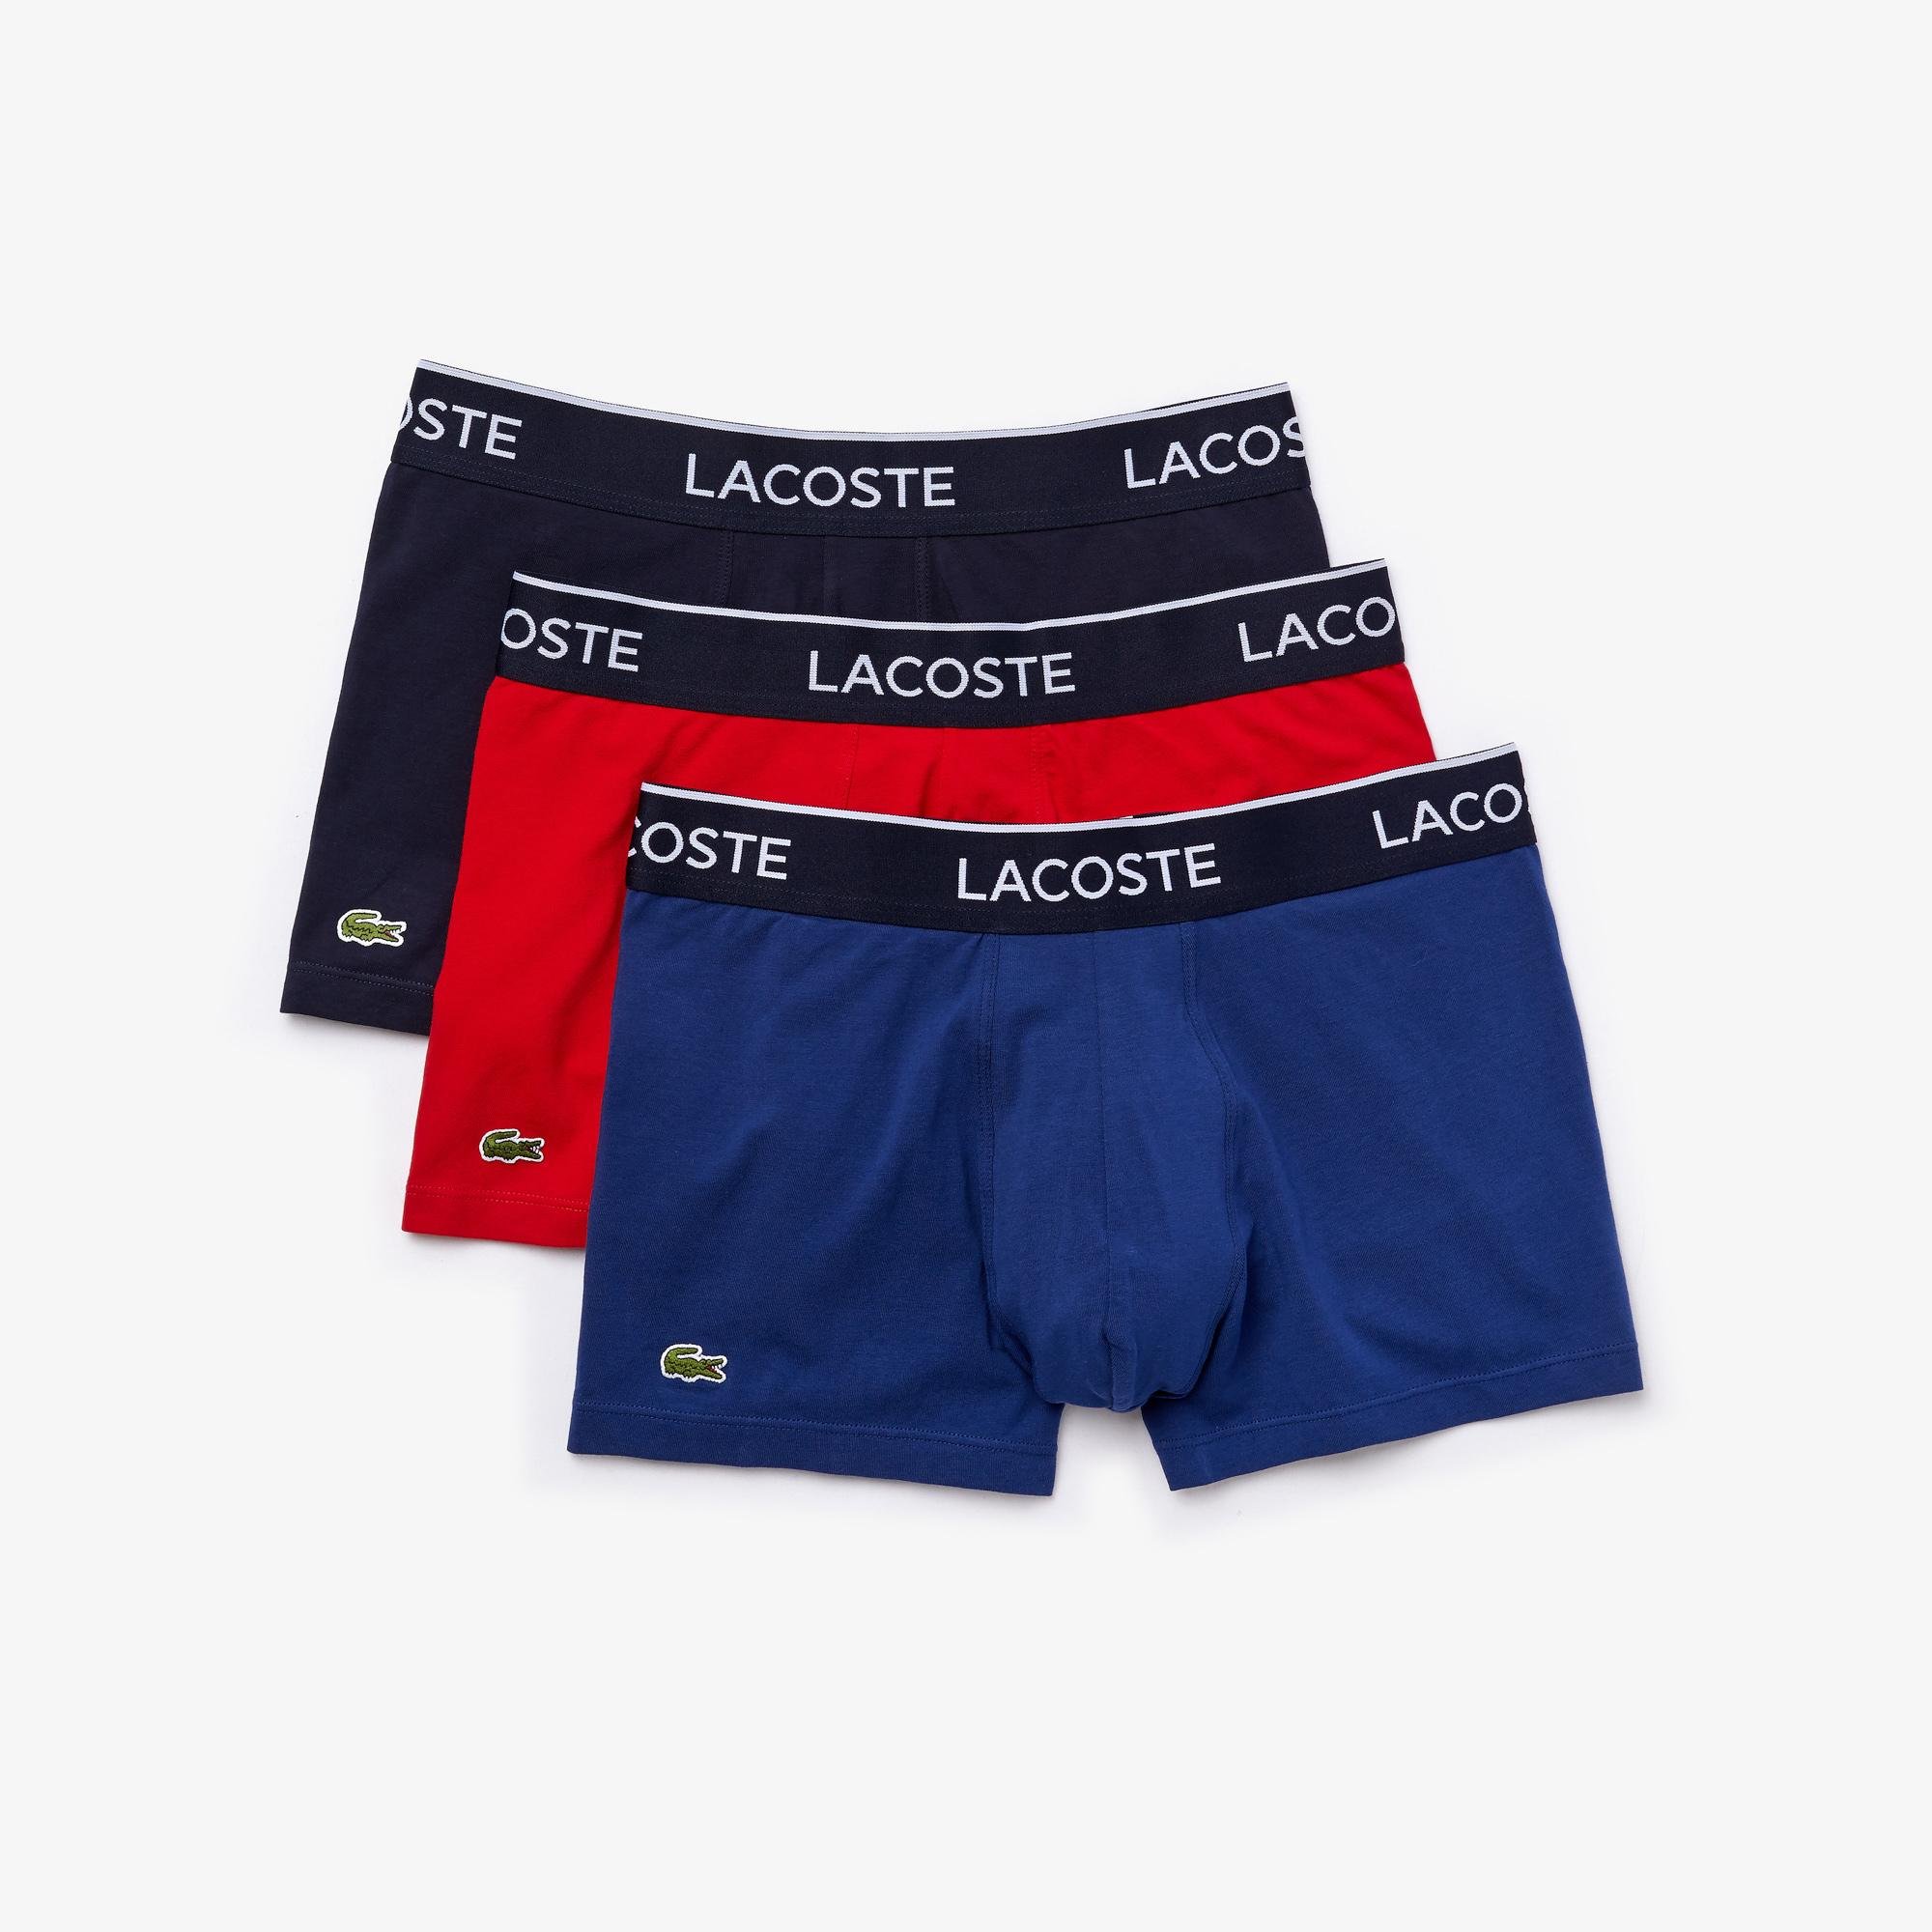 Lacoste 3 db. casual fekete boxeralsó